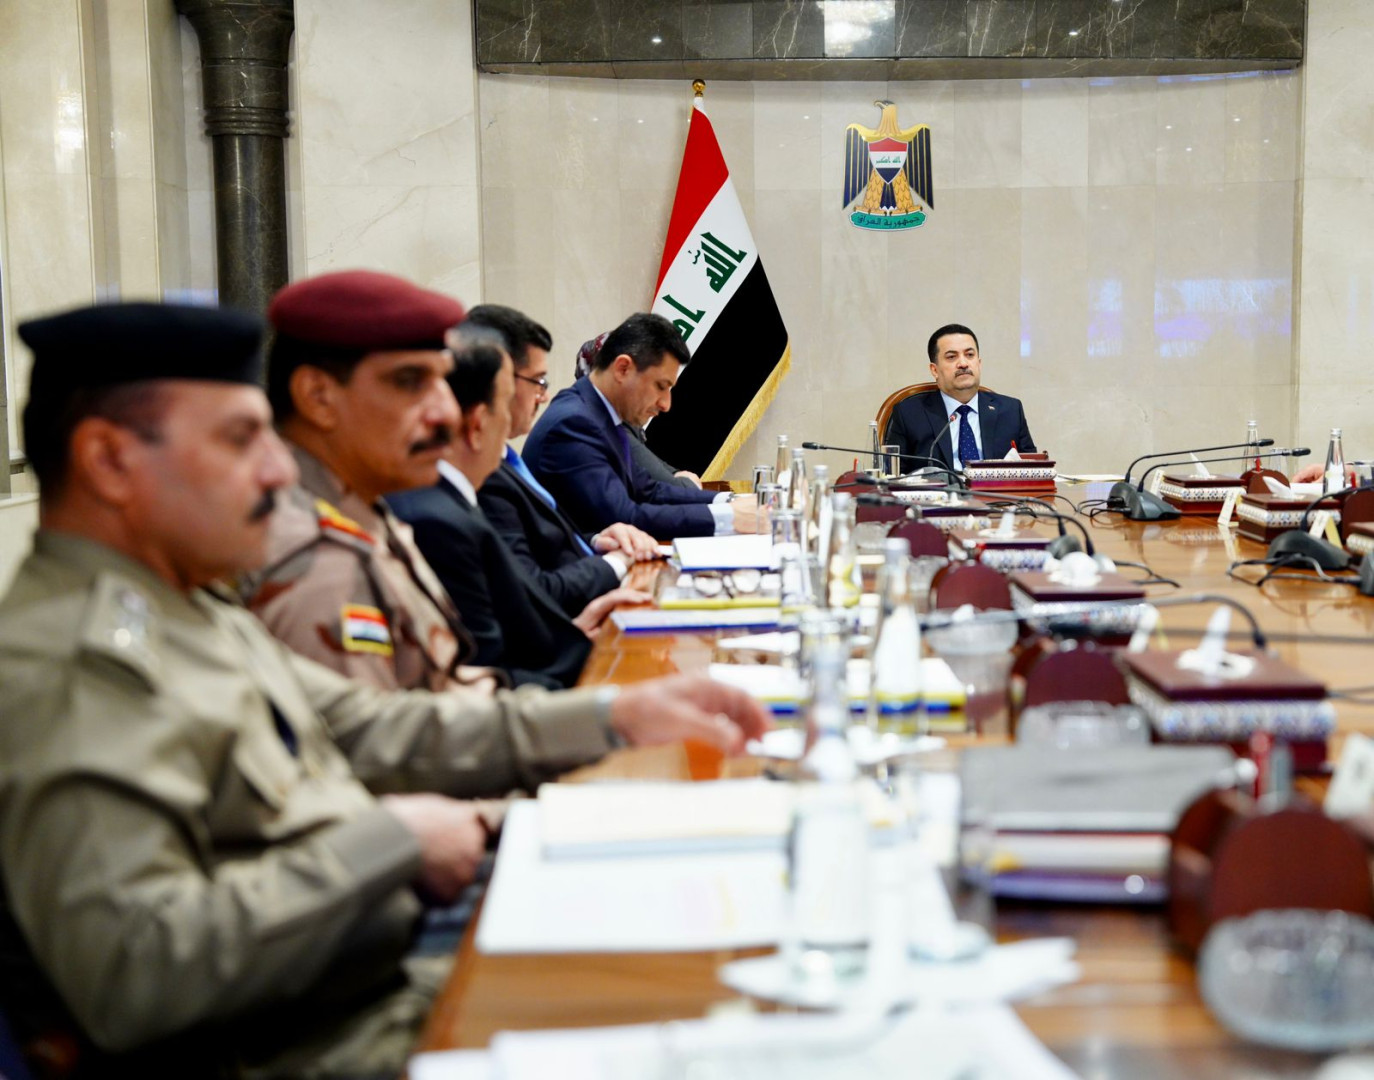 Al-Sudani discusses security updates at National Security Council meeting